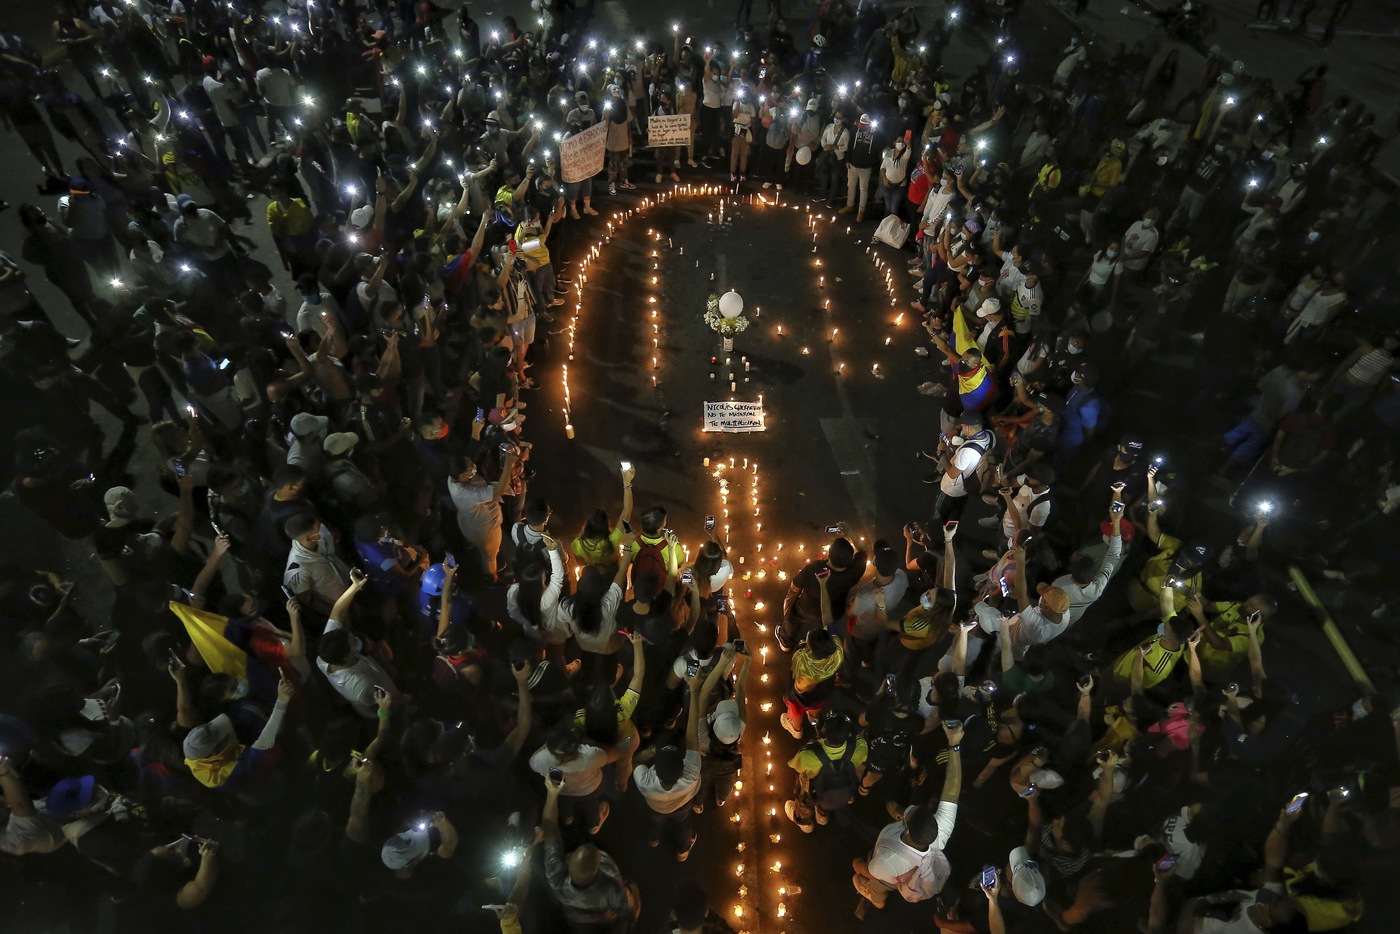 People light candles during a vigil in honor of Nicolas Guerrero who died after being shot during a national strike against tax reform in Cali, Colombia, Monday, May 3, 2021. Guerrero was shot during clashes with police on Sunday and died this morning. Colombia’s President Ivan Duque withdrew the government-proposed tax reform on Sunday. (AP Photo/Andres Gonzalez)